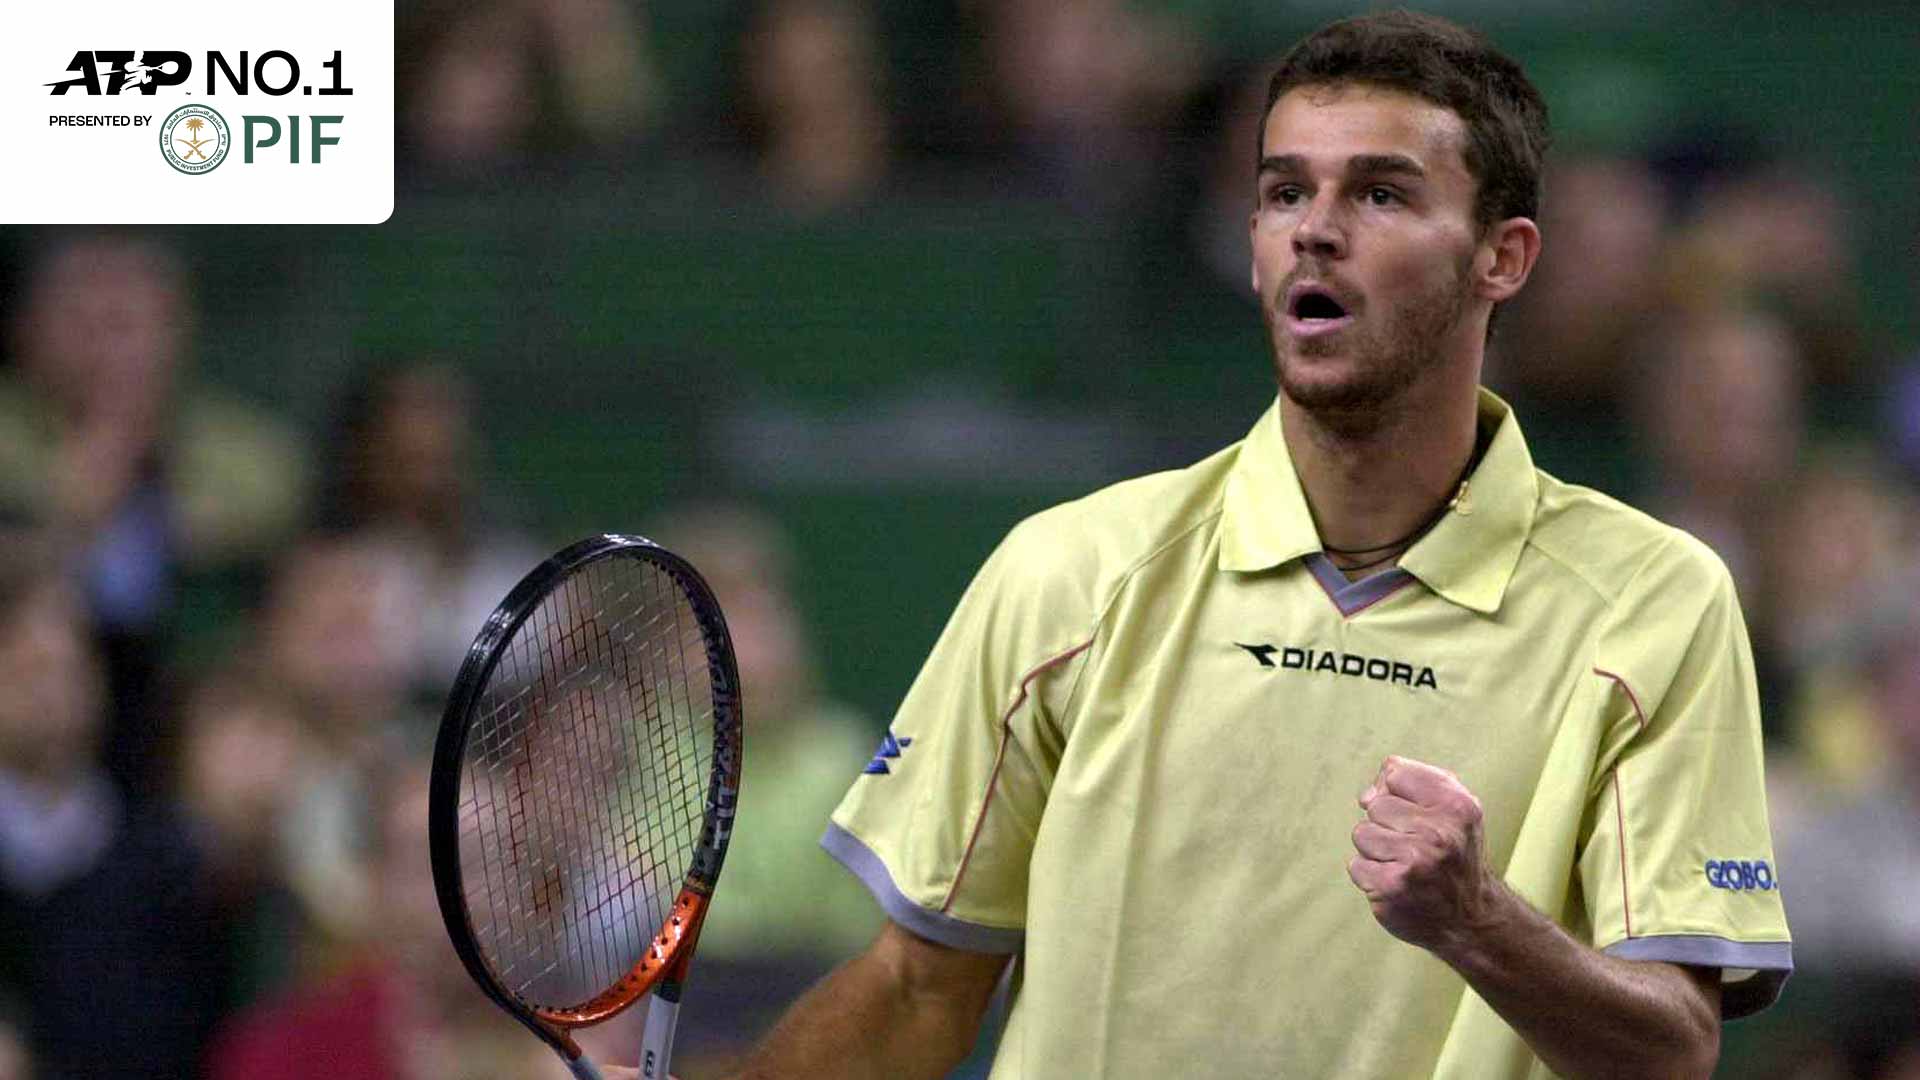 Gustavo Kuerten rose to World No. 1 in the PIF ATP Rankings for the first time after winning the 2000 Nitto ATP Finals.